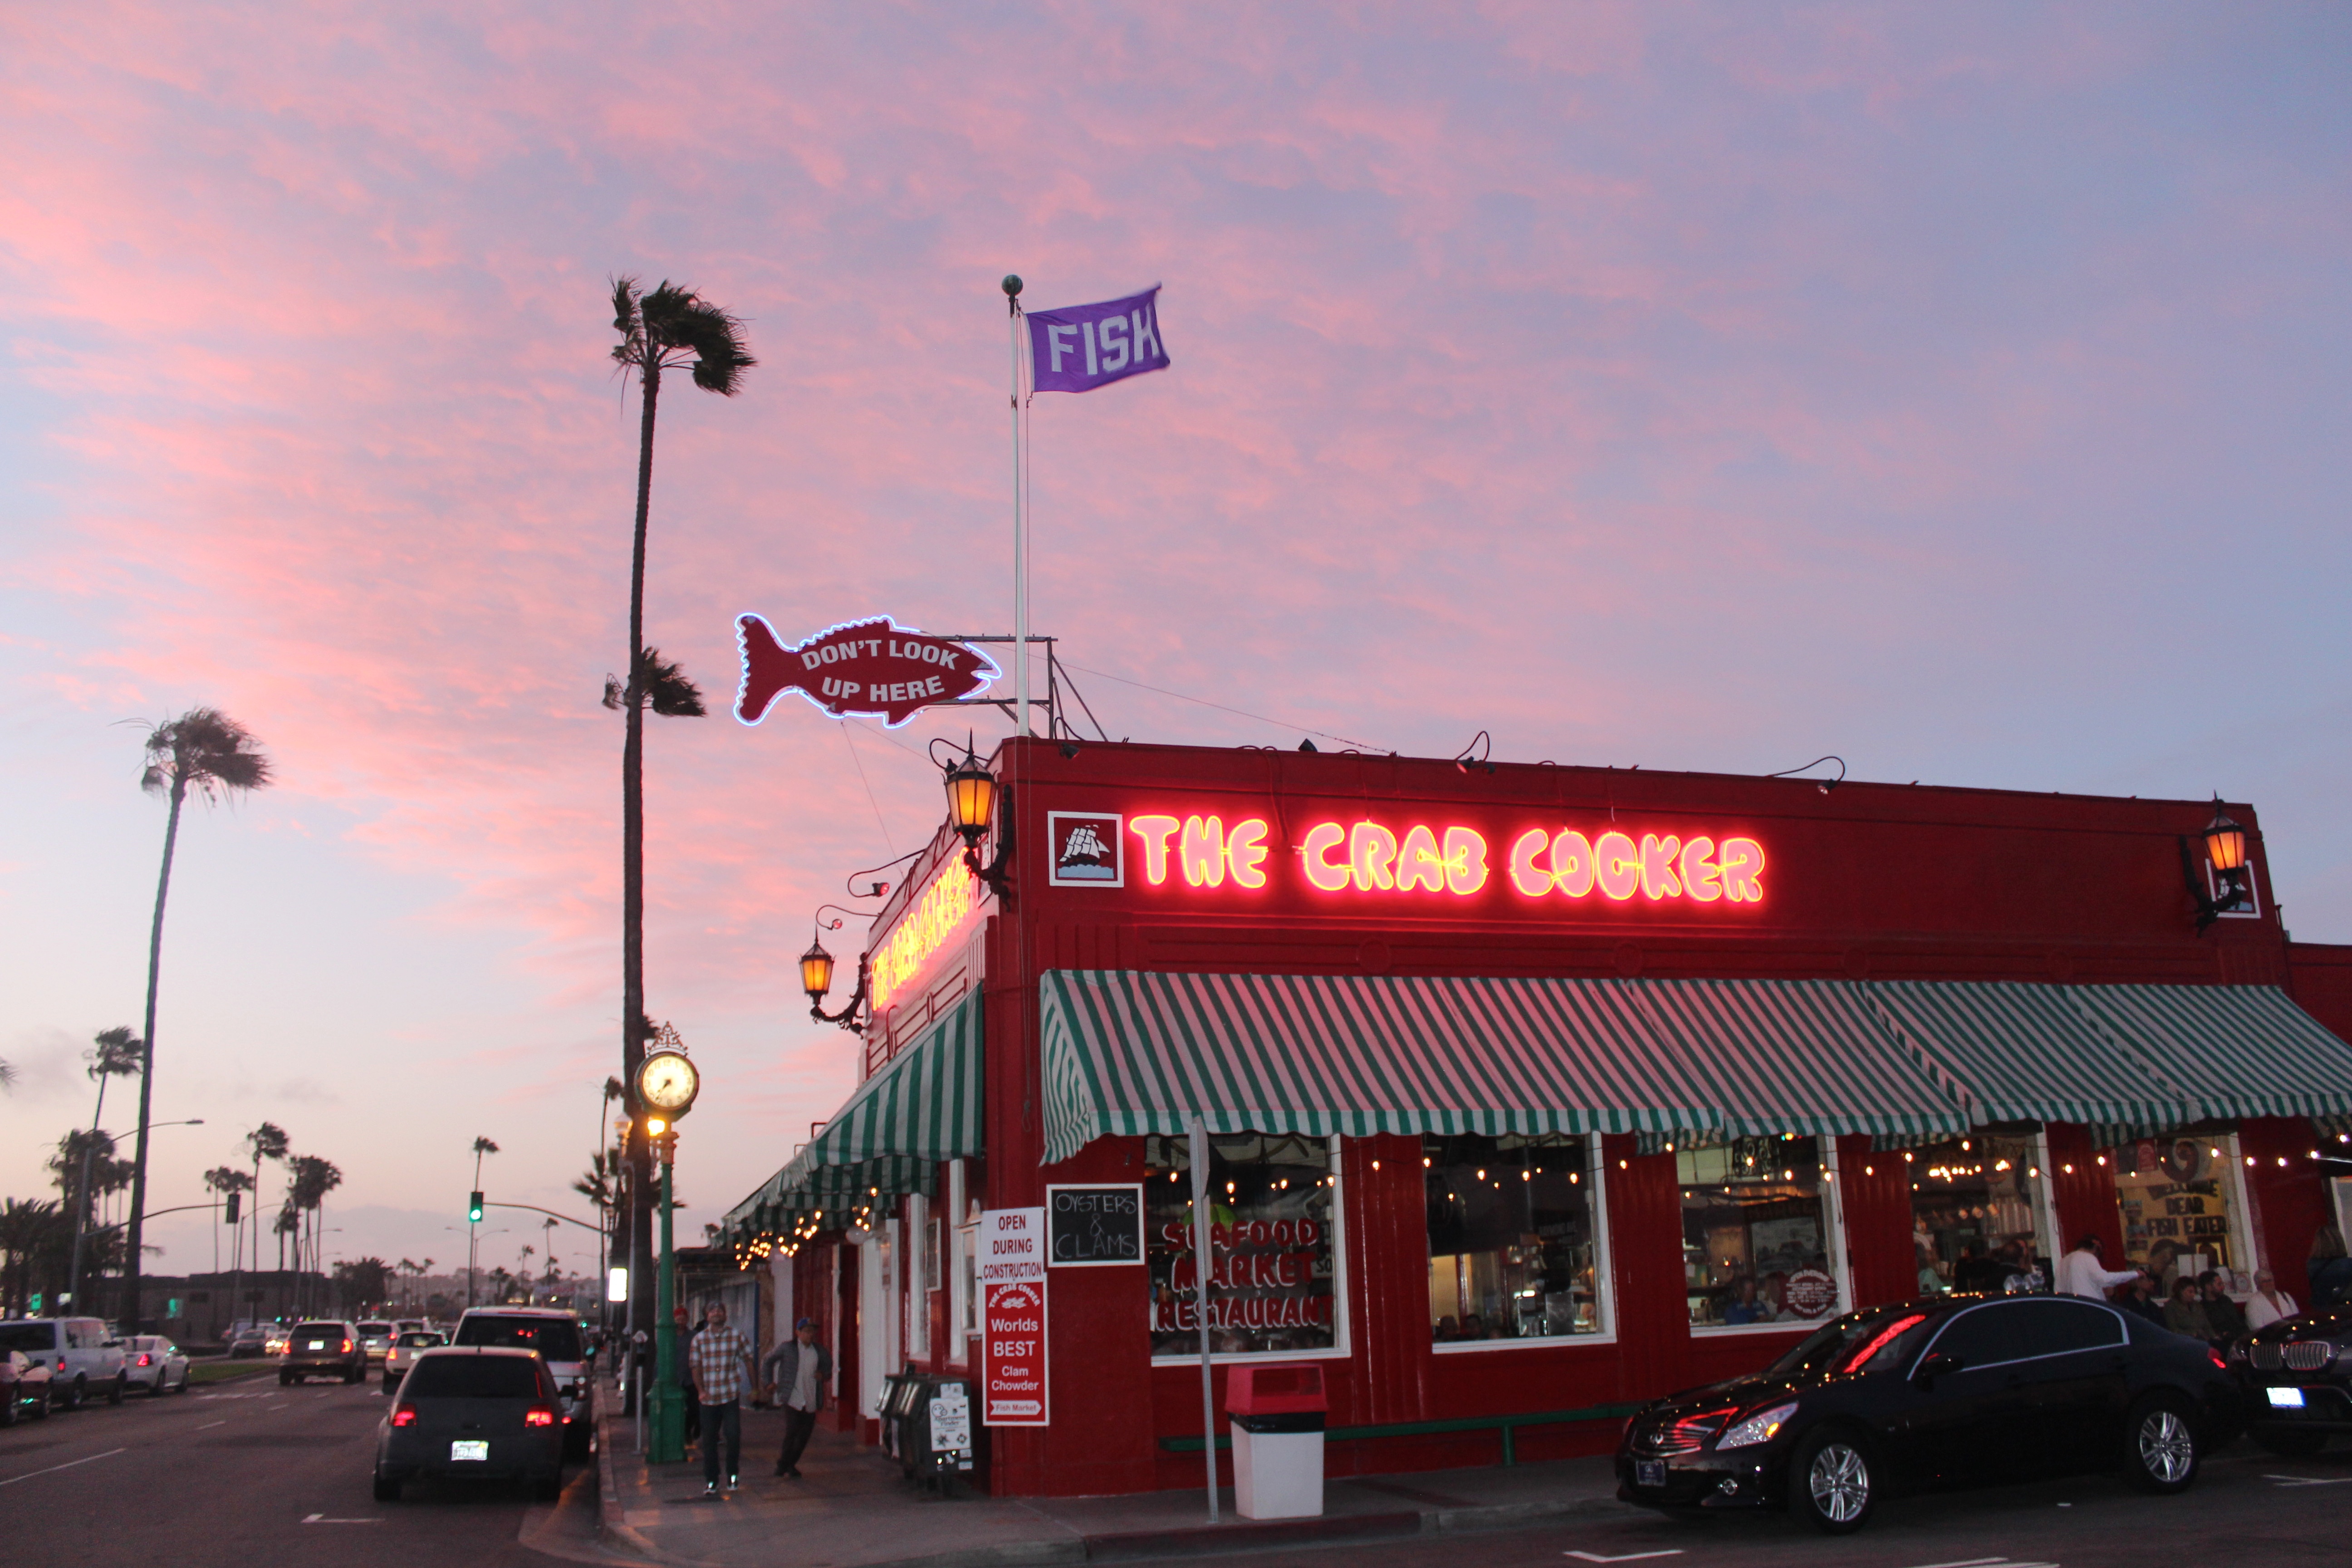 seafood in socal: the crab cooker